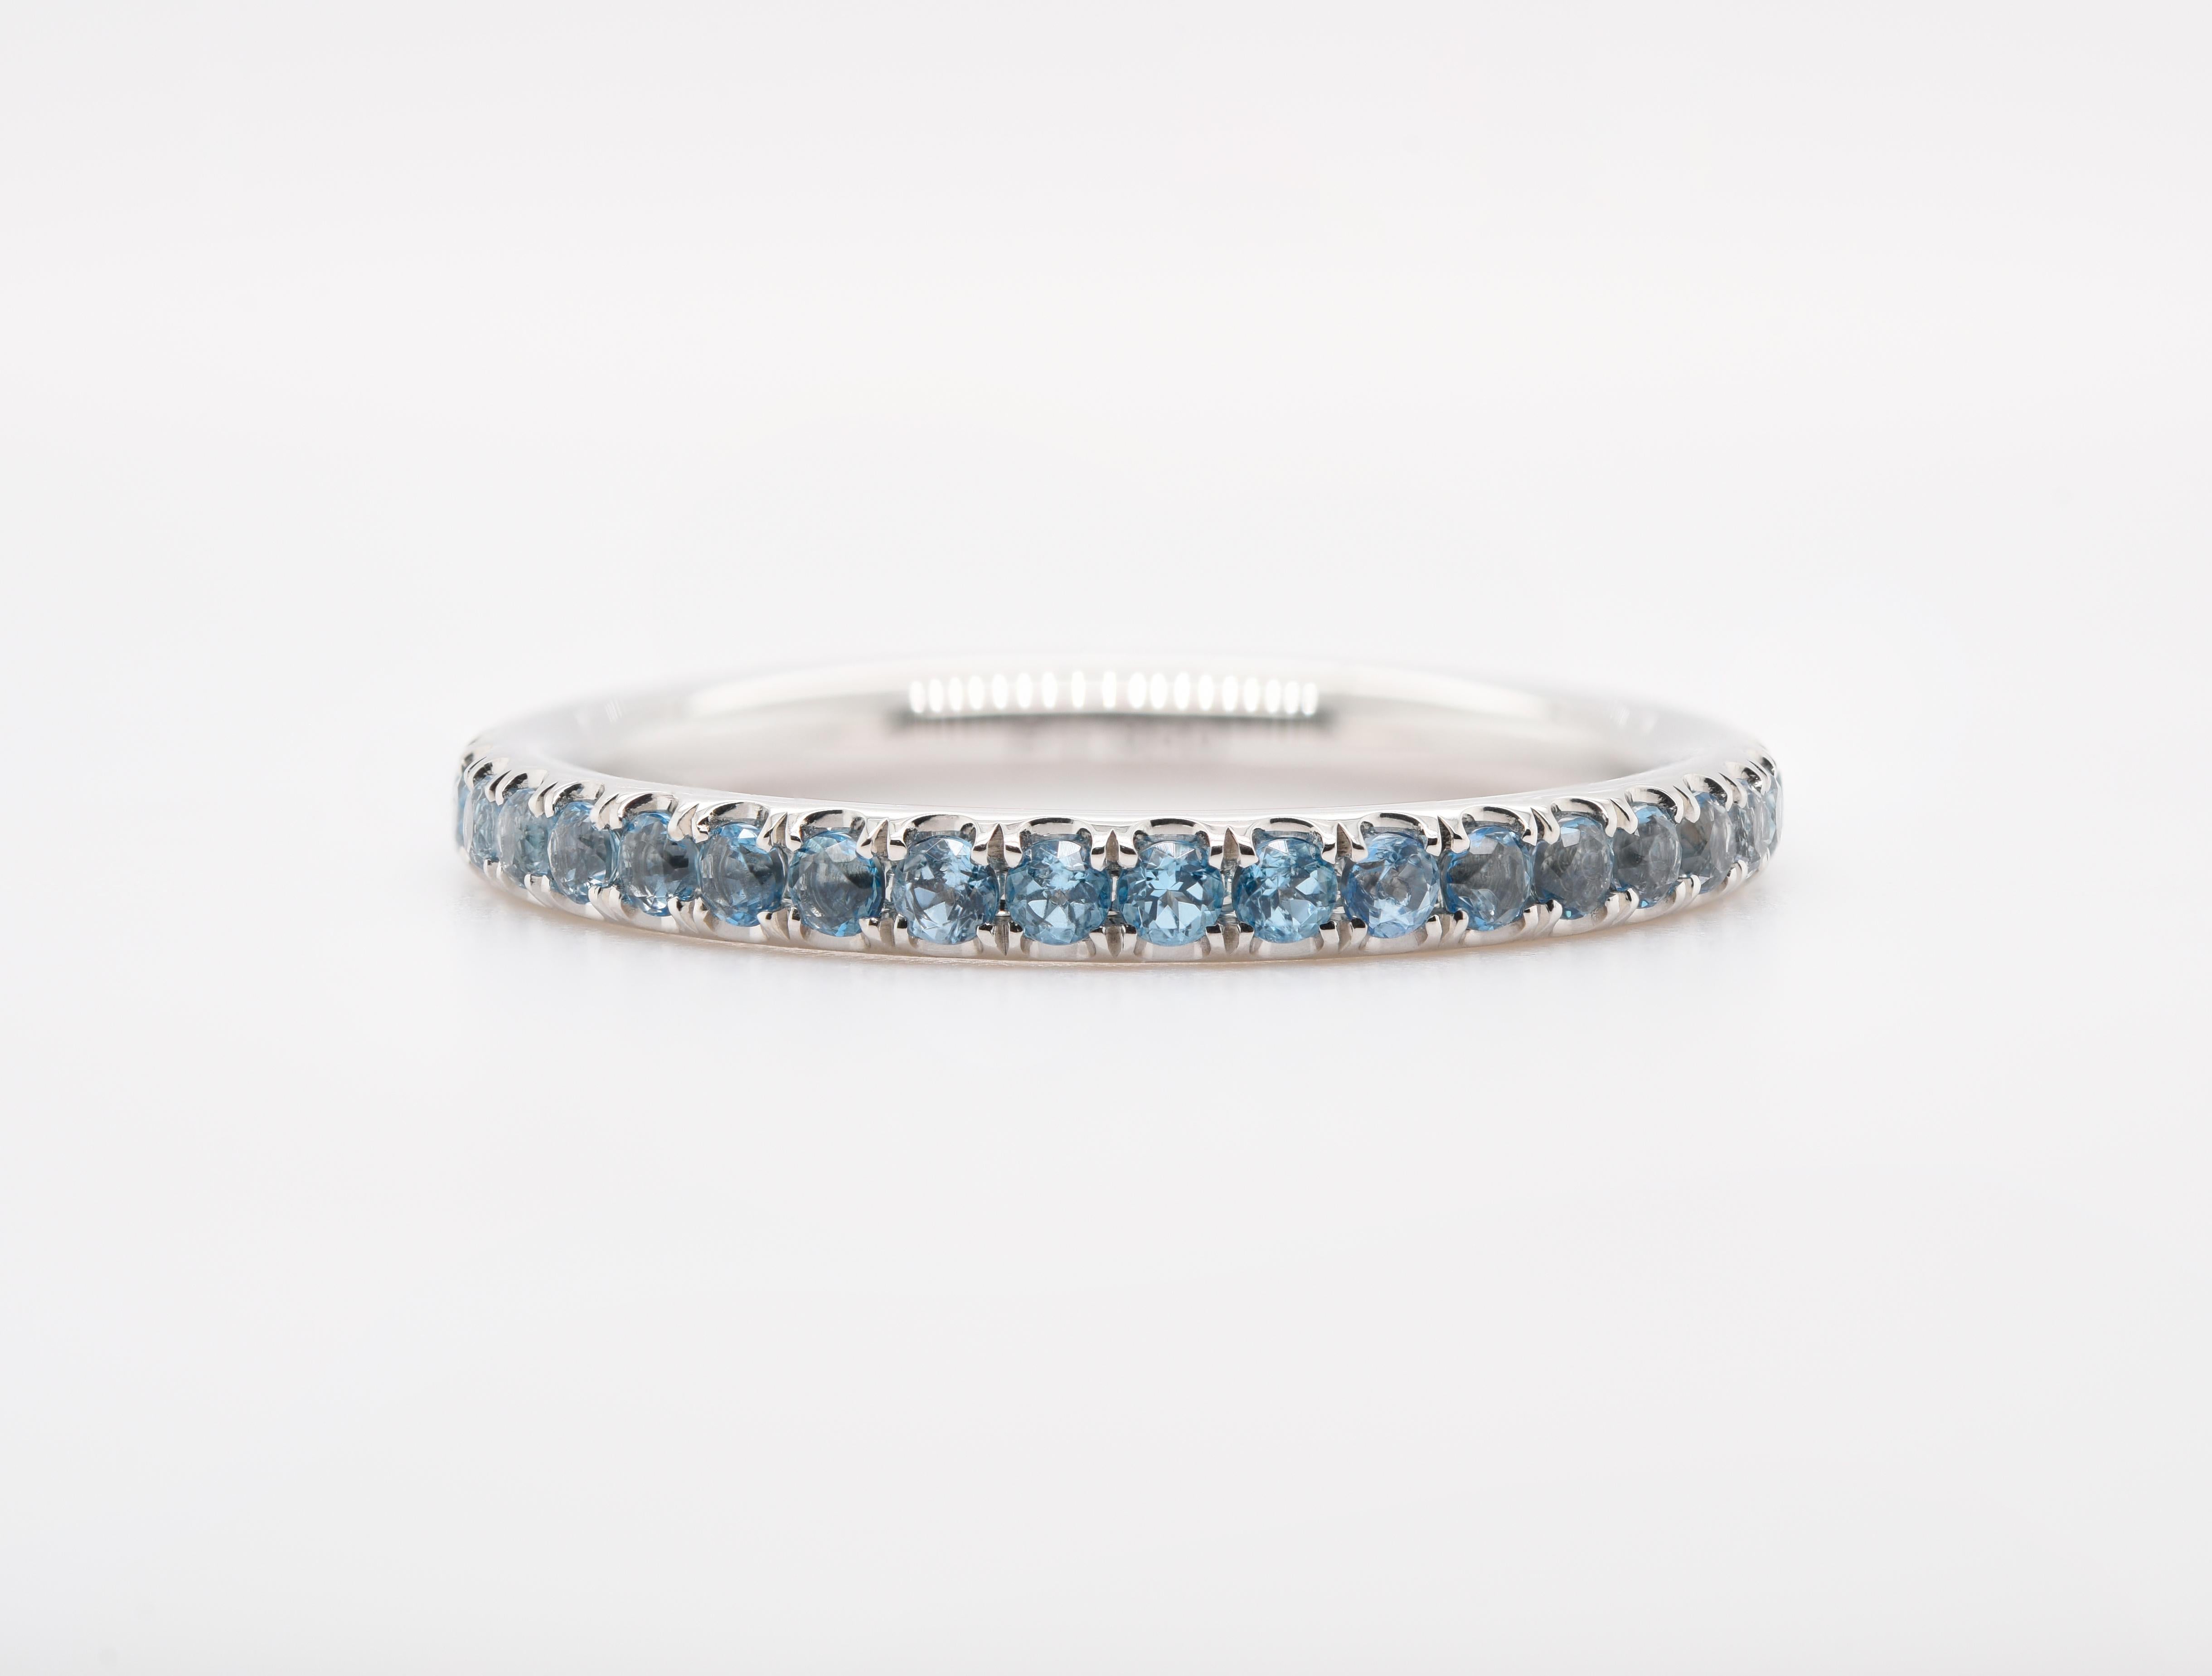 Artisan JAG New York Eternity Band with Your Choice of Diamonds and Gemstones